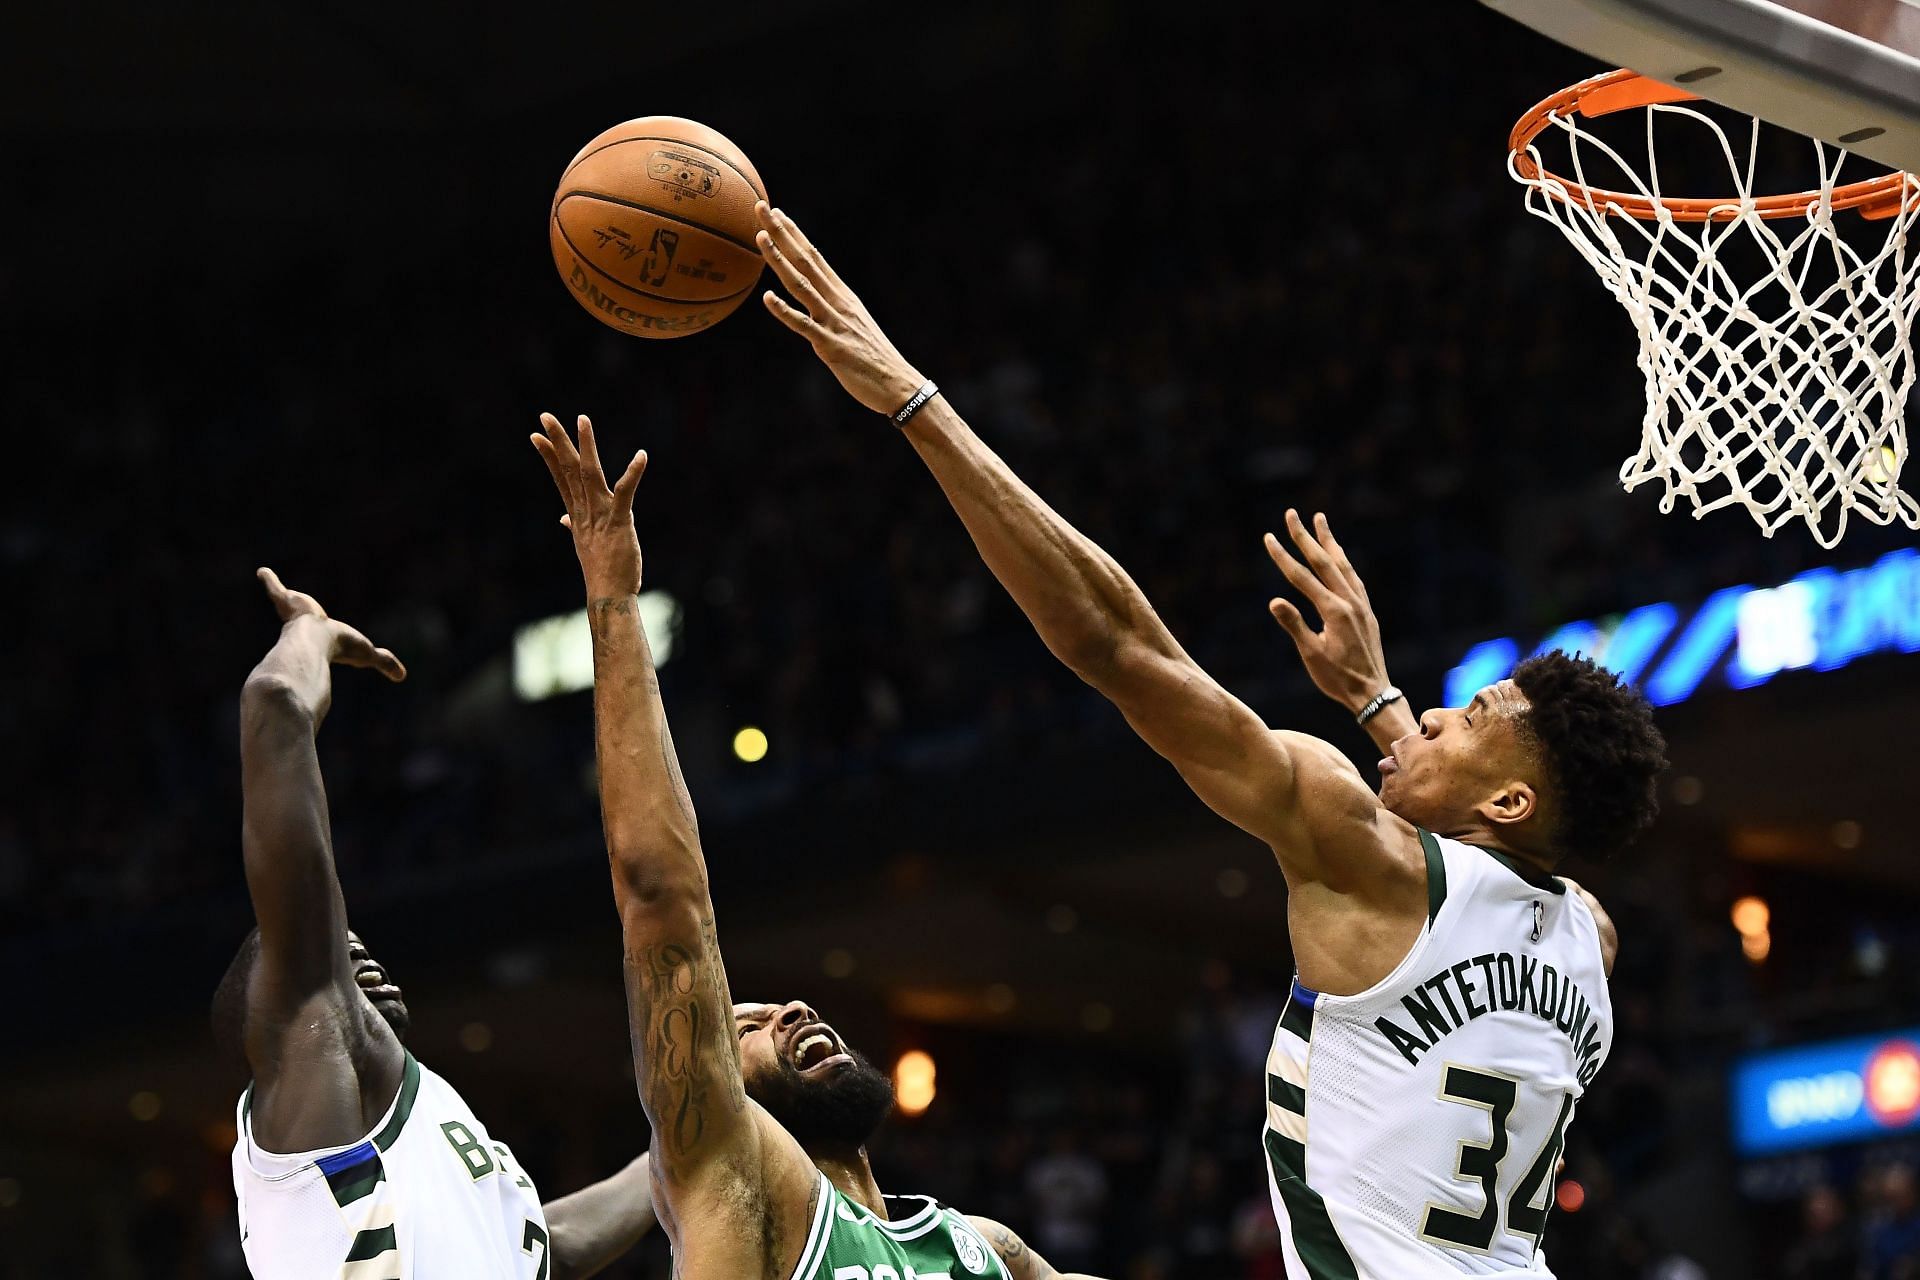 Giannis Antetokounmpo is a reliable rim protector